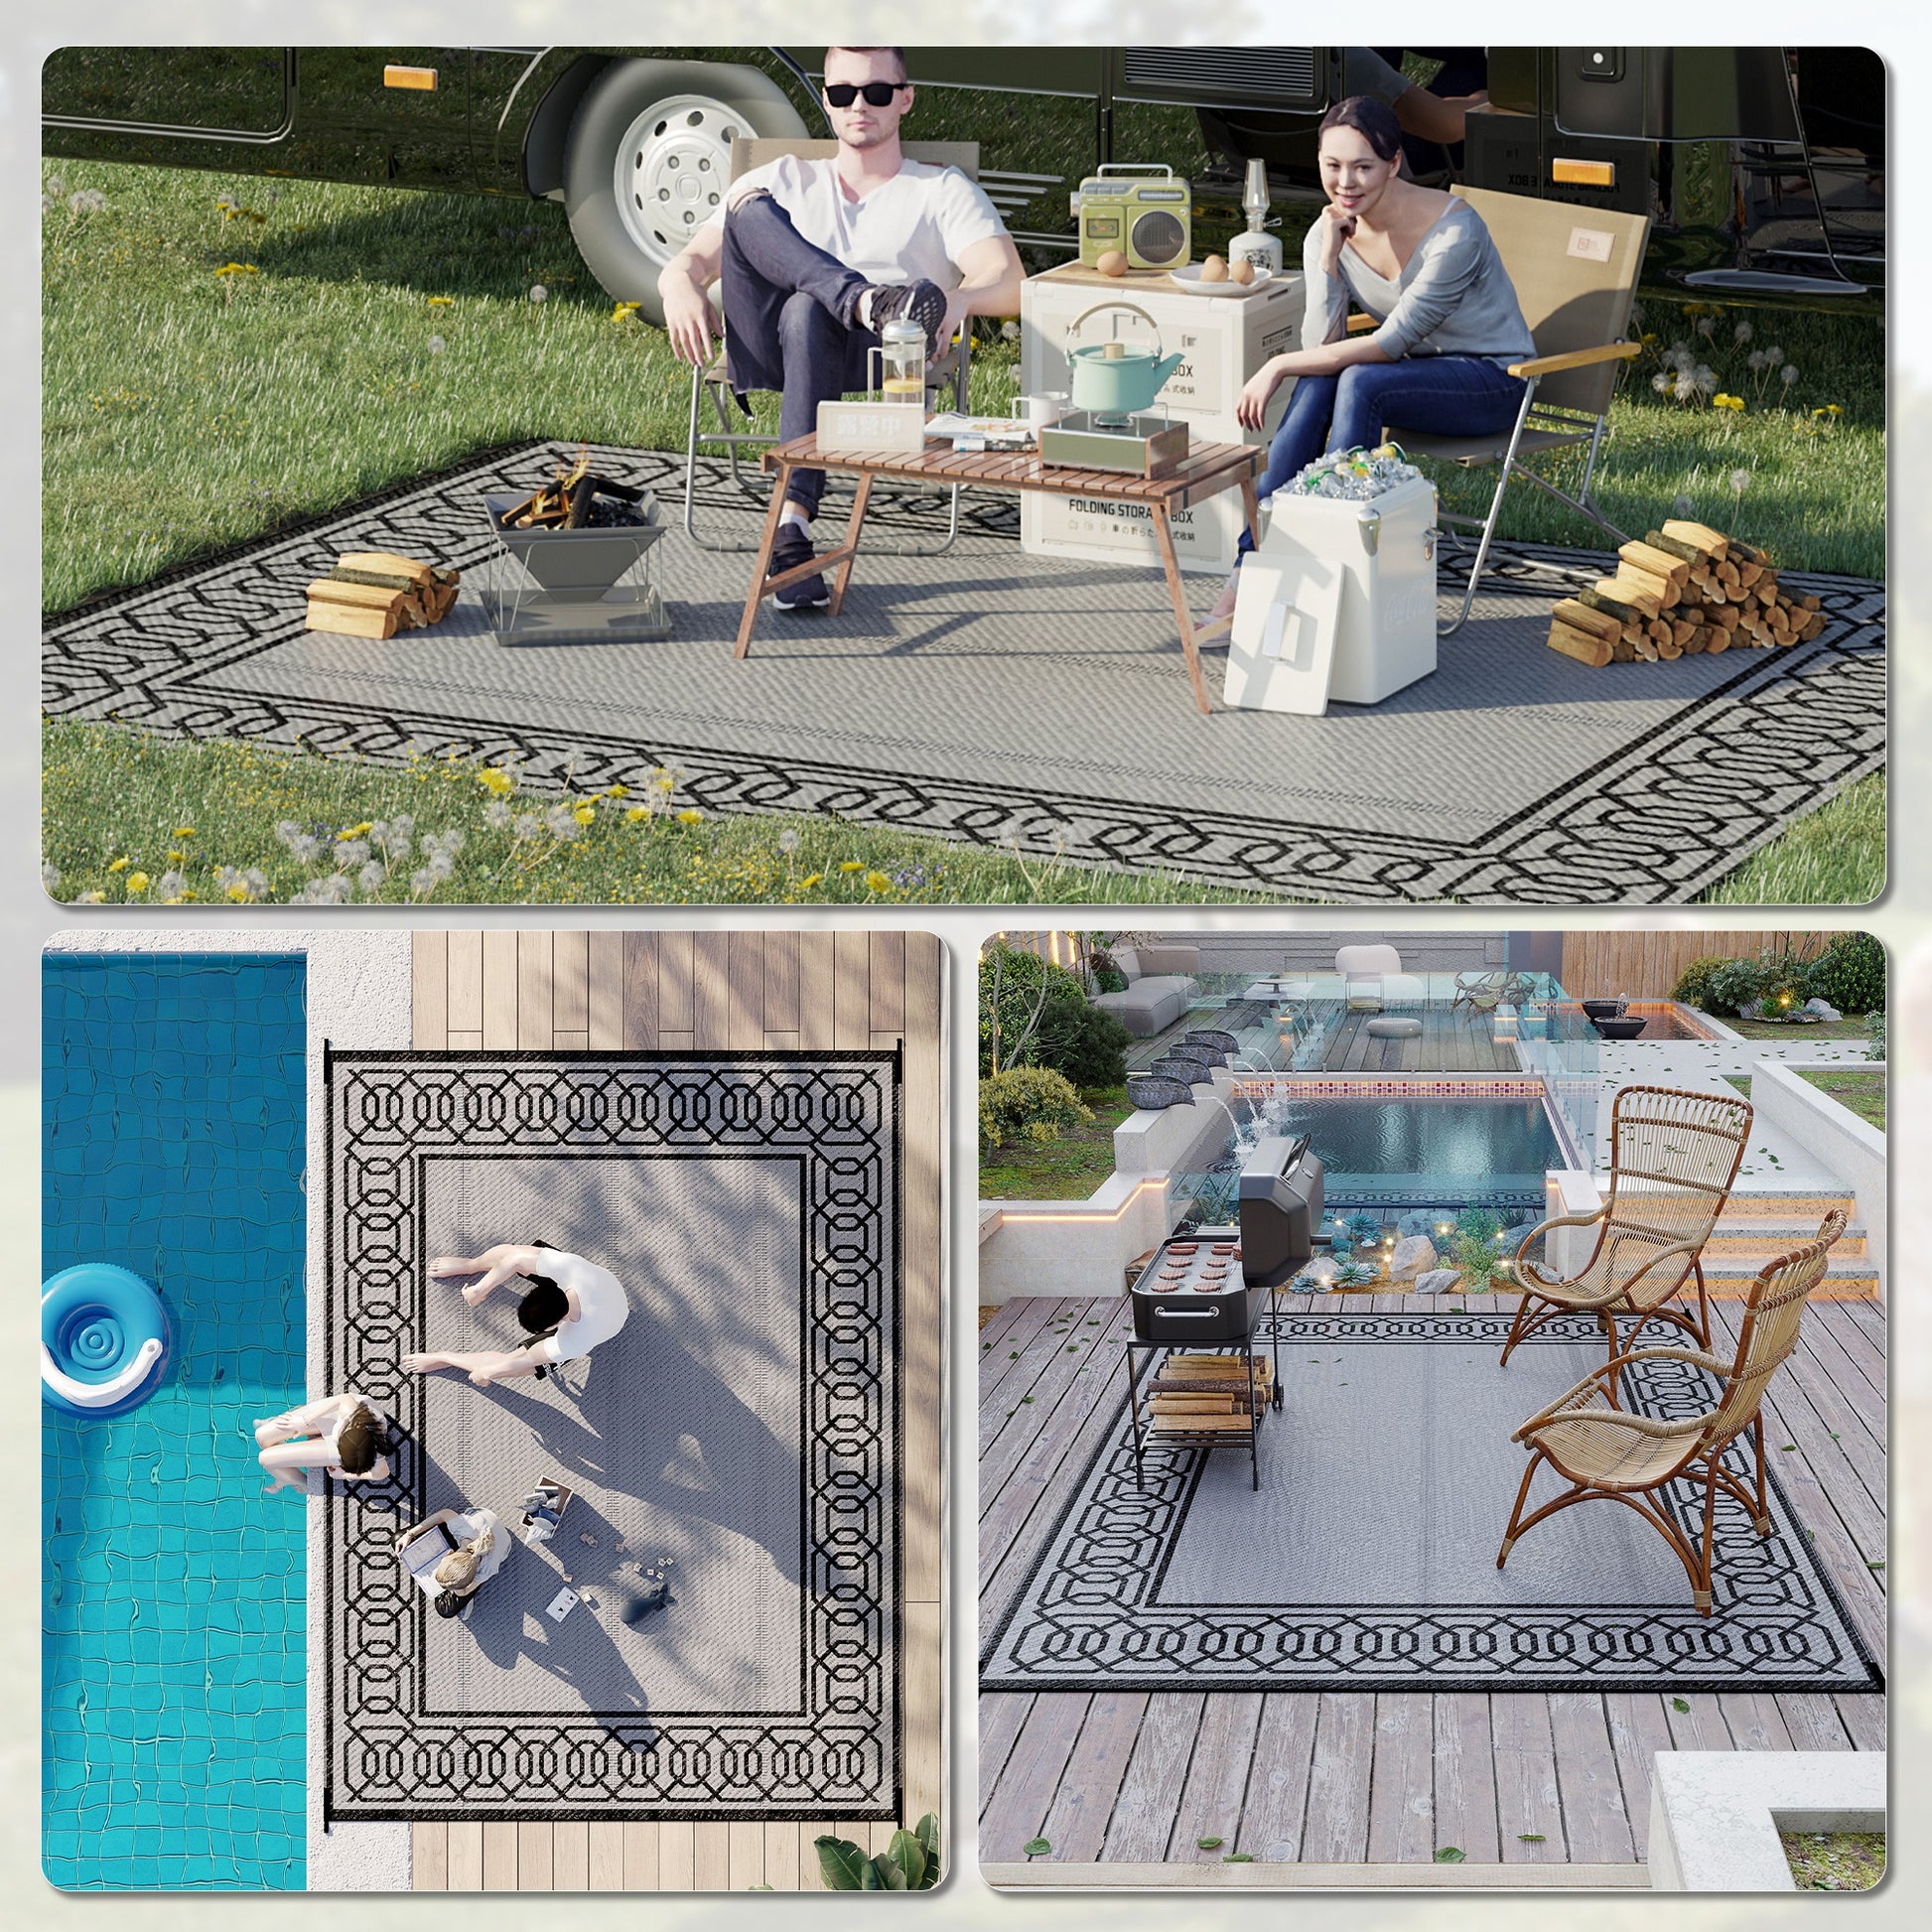 Portable Outdoor Rug with Carrying Bag, 9' x 12' Reversible Mat, Waterproof Plastic Straw RV Rug for Backyard, Deck, Picnic, Beach, Camping, Black and Grey at Gallery Canada